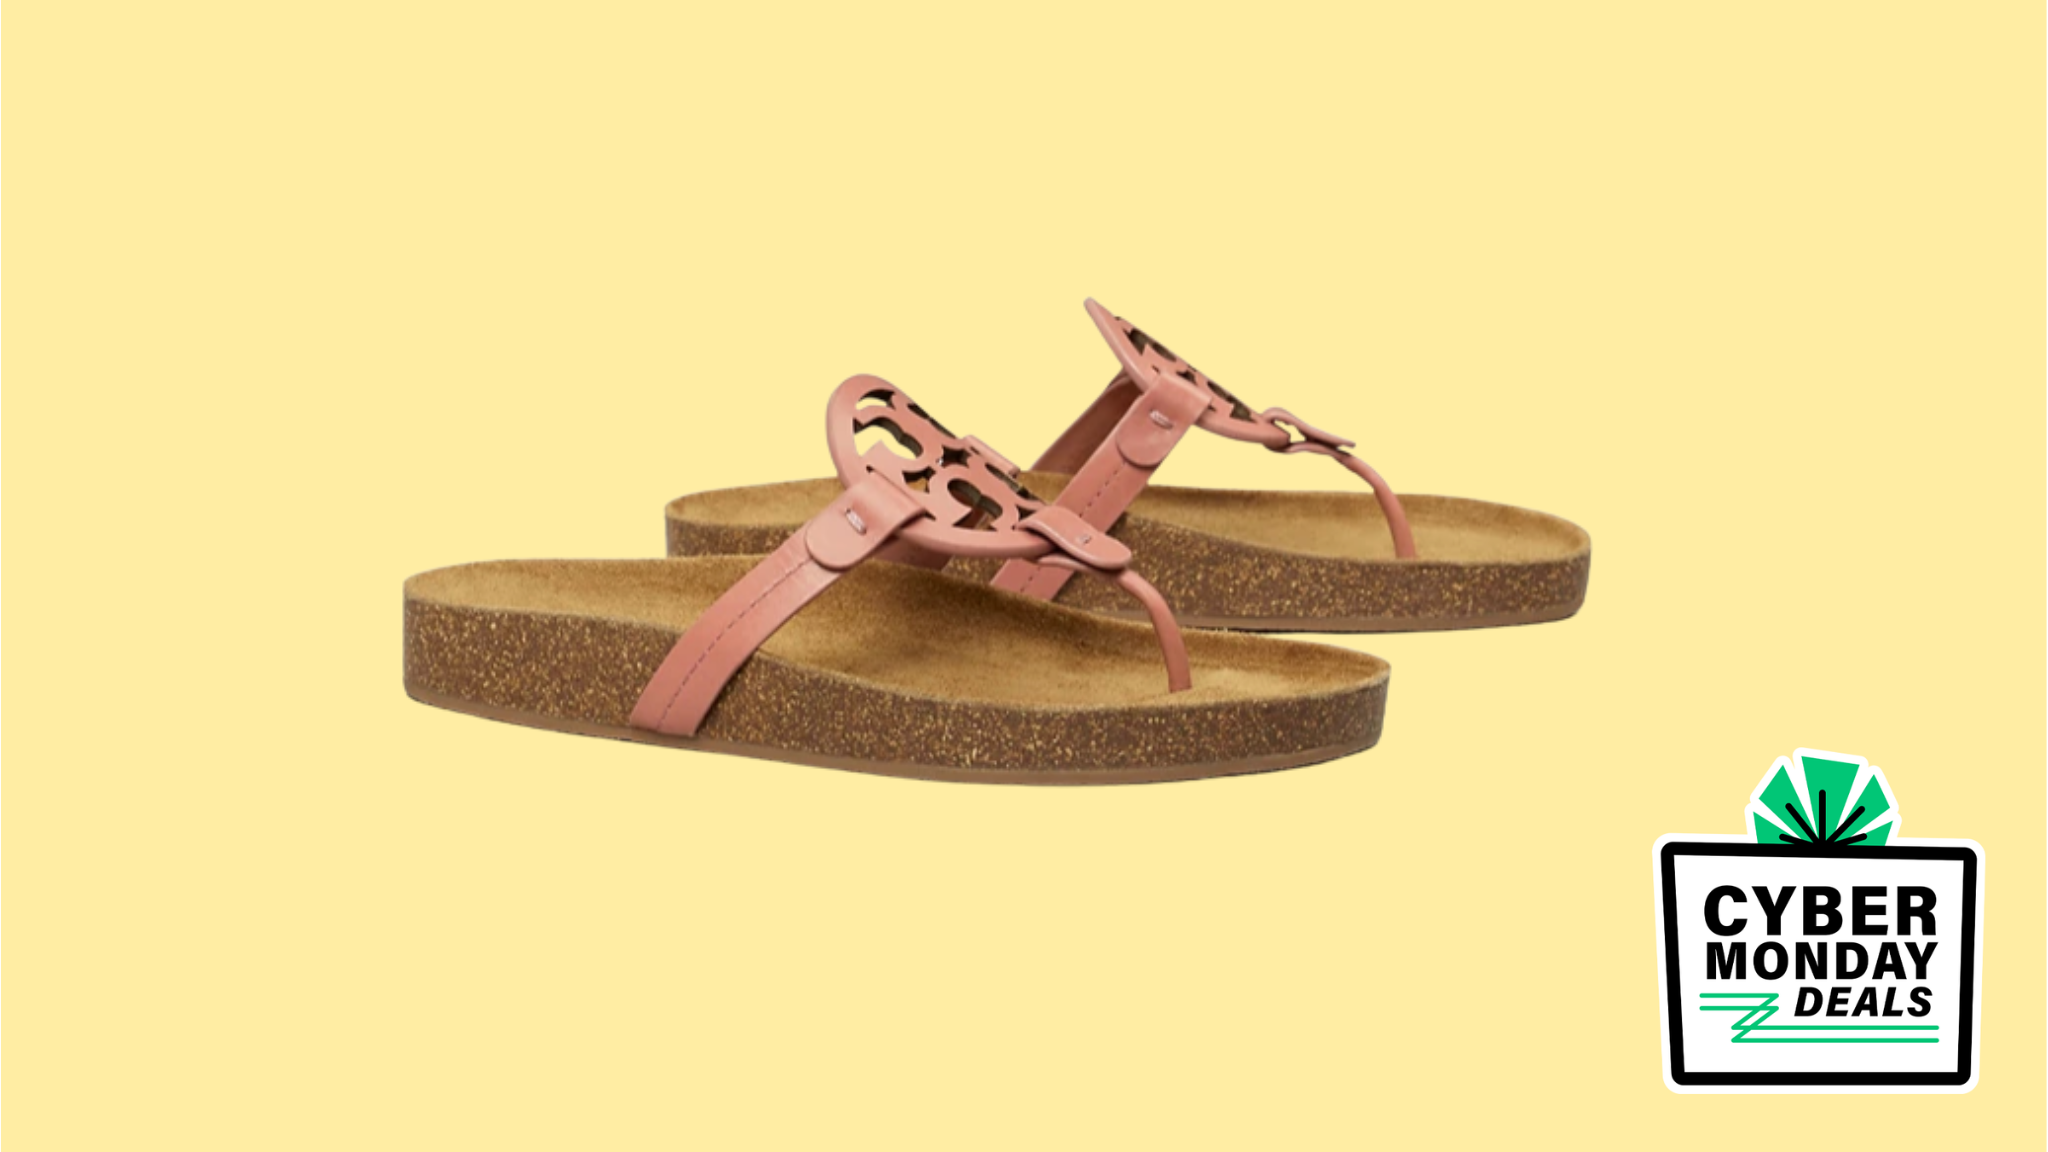 The Tory Burch Miller Cloud sandals are on sale this Cyber Monday